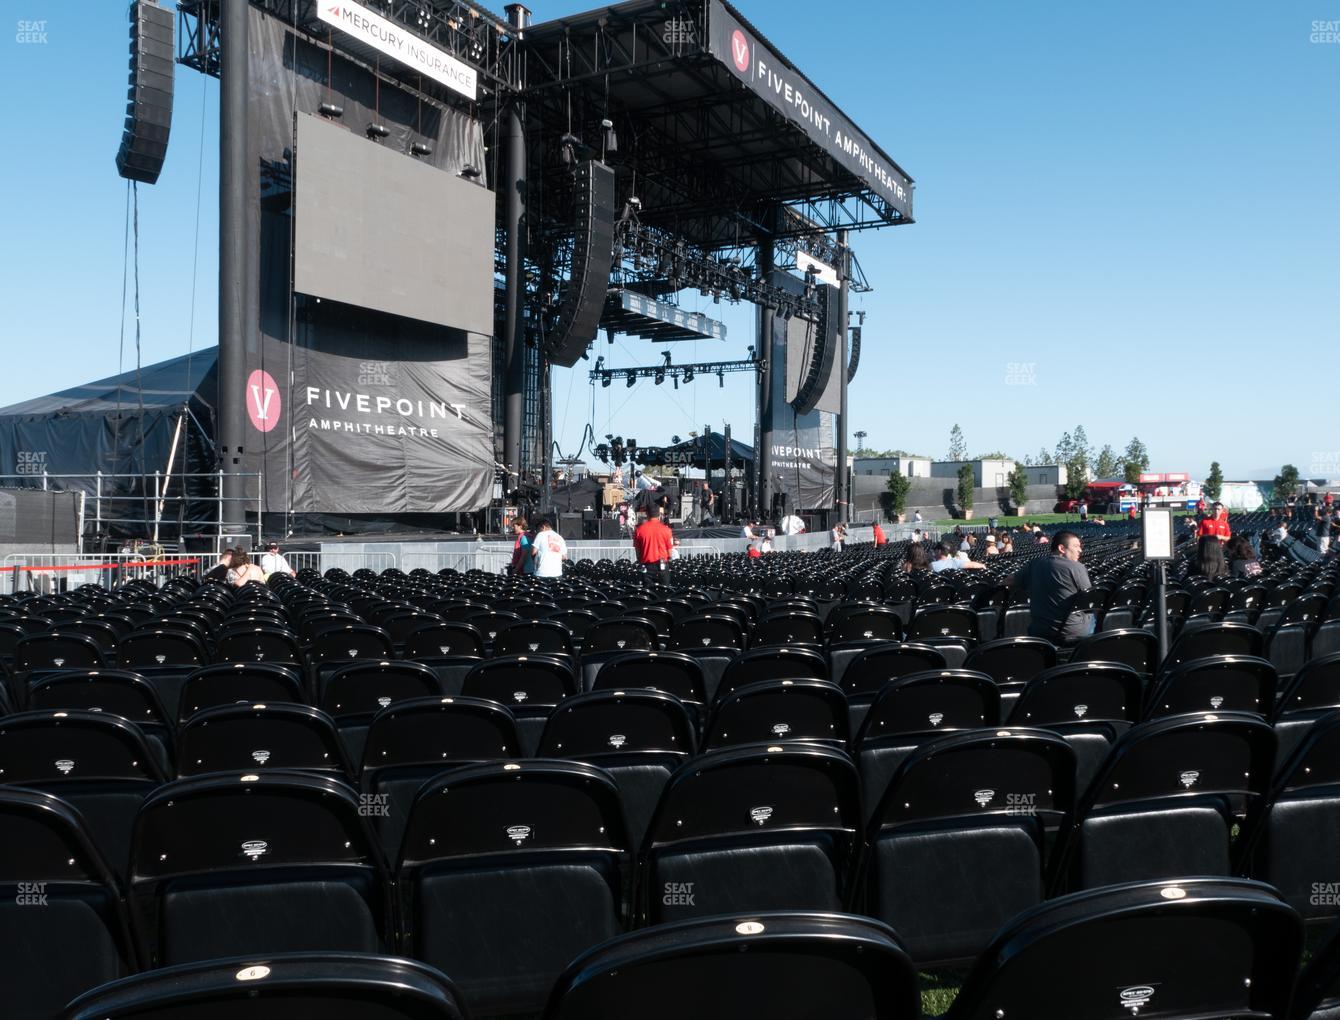 5 Points Amphitheater Irvine Seating Chart